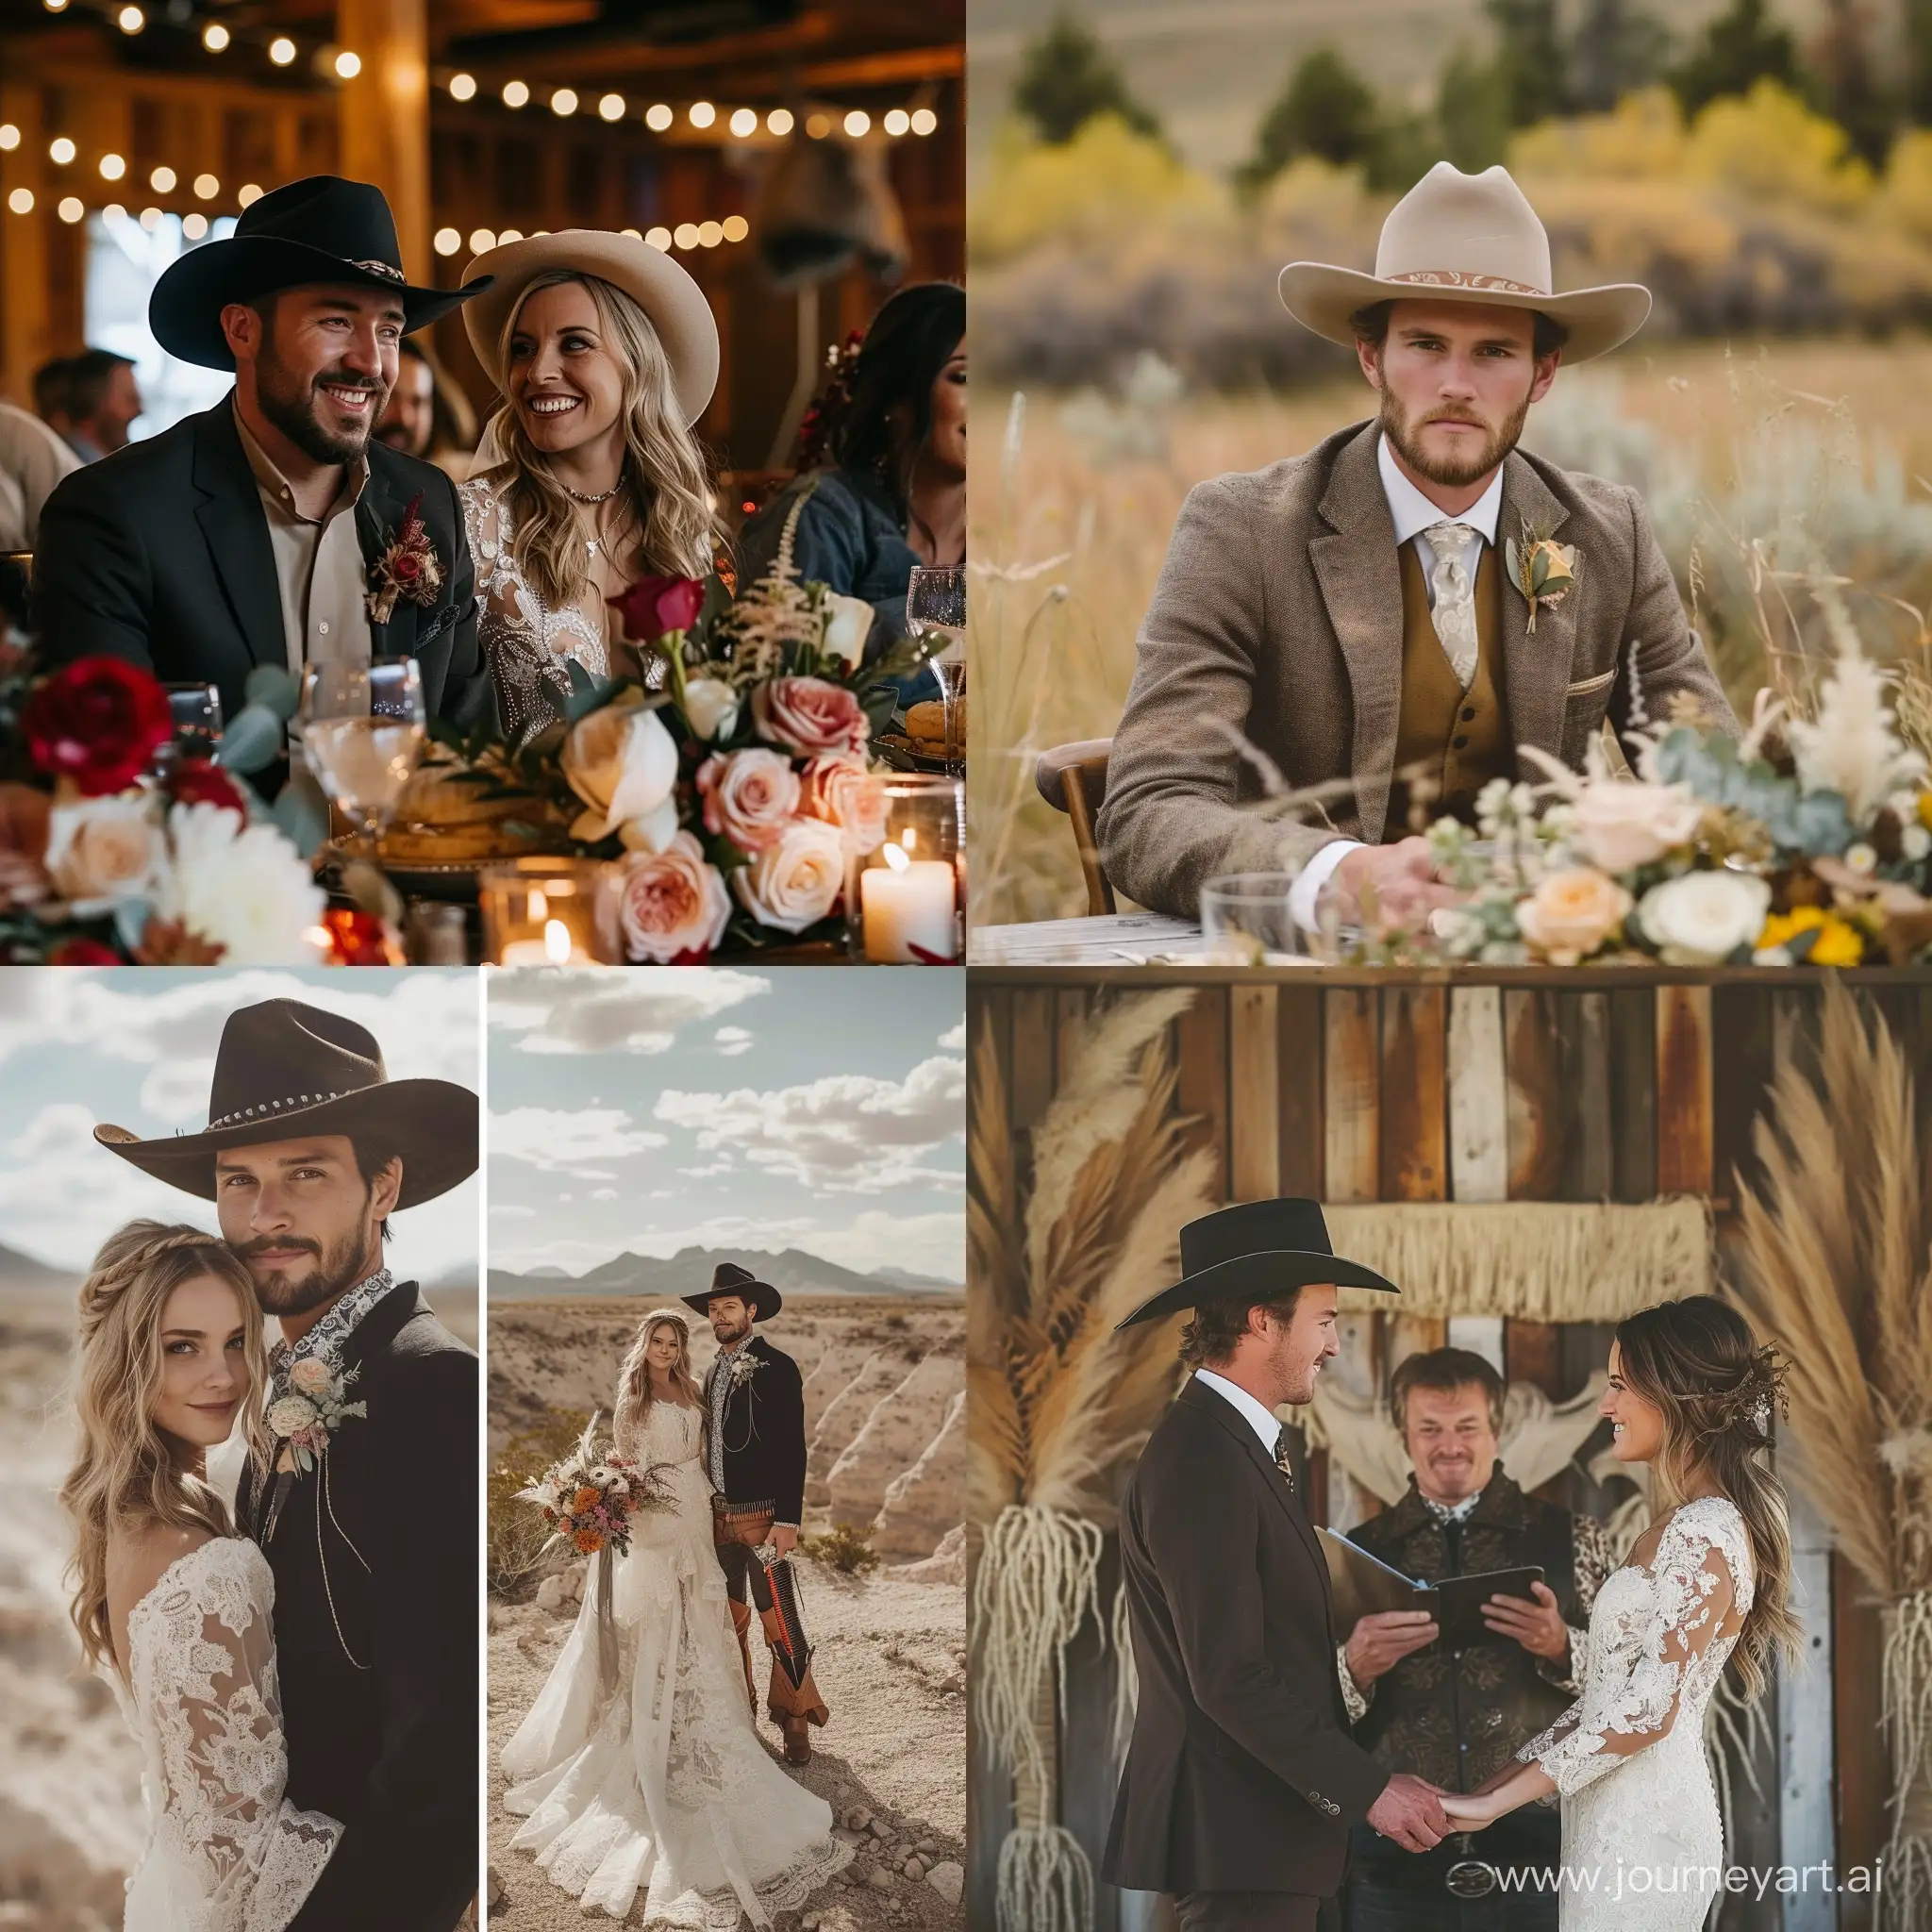 Wild-West-Wedding-Celebration-with-Cowboy-Couple-in-a-Vintage-Setting